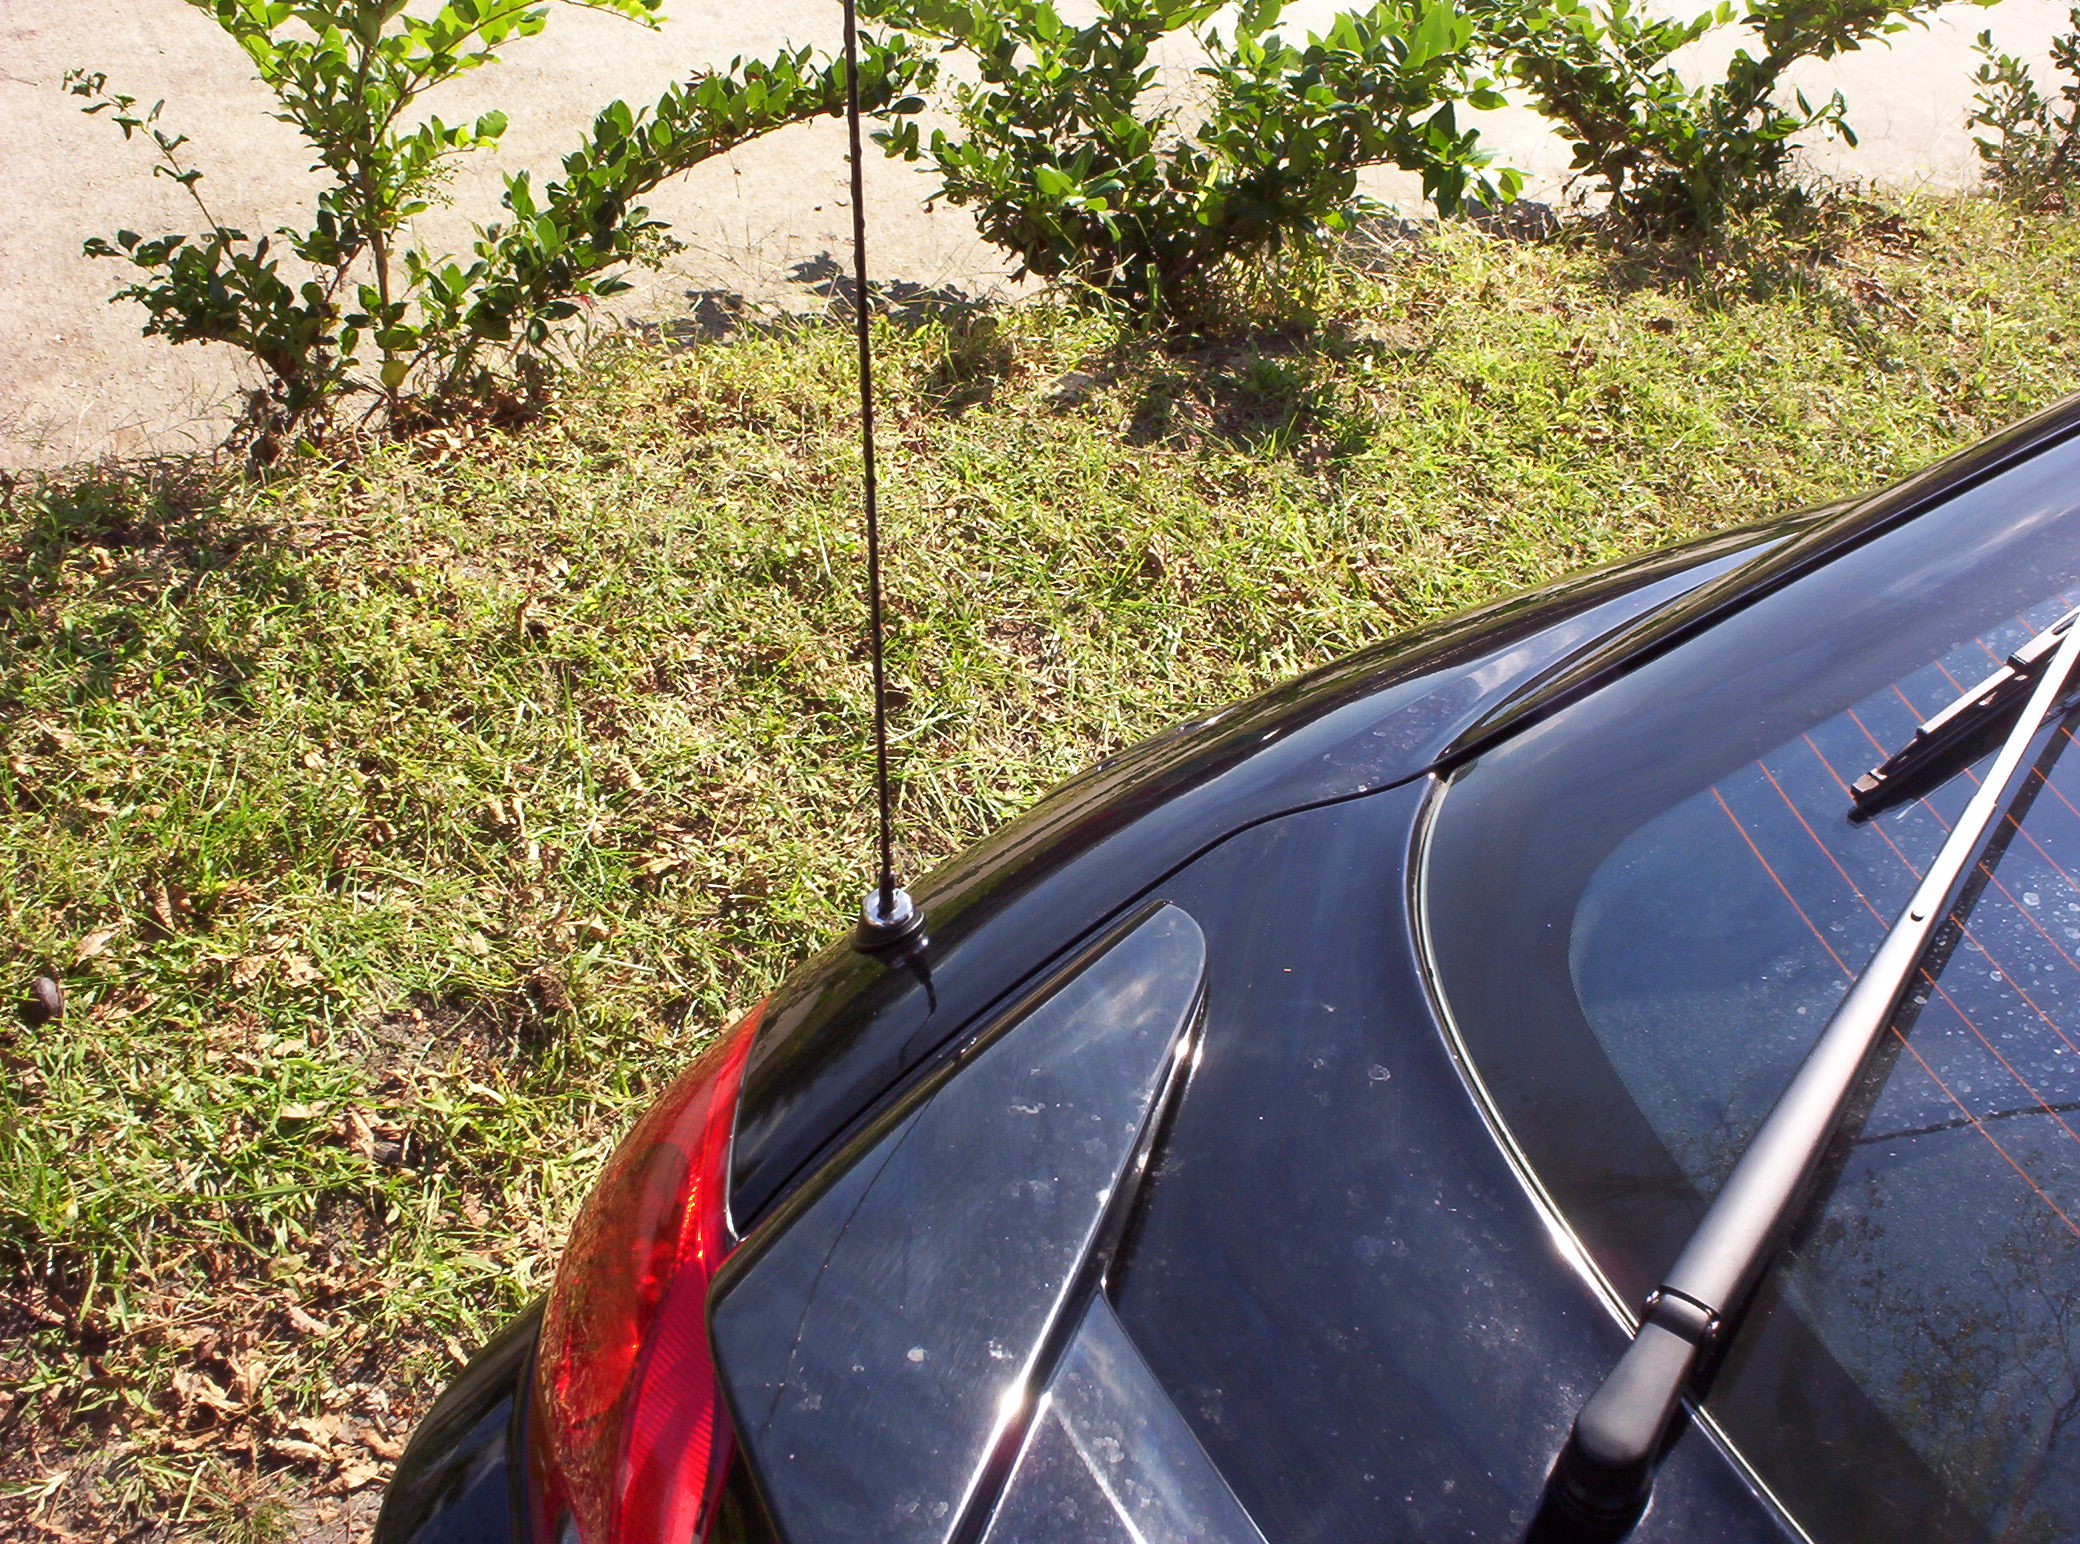 STEP BY STEP HOW TO REPLACE HYUNDAI CAR ANTENNA